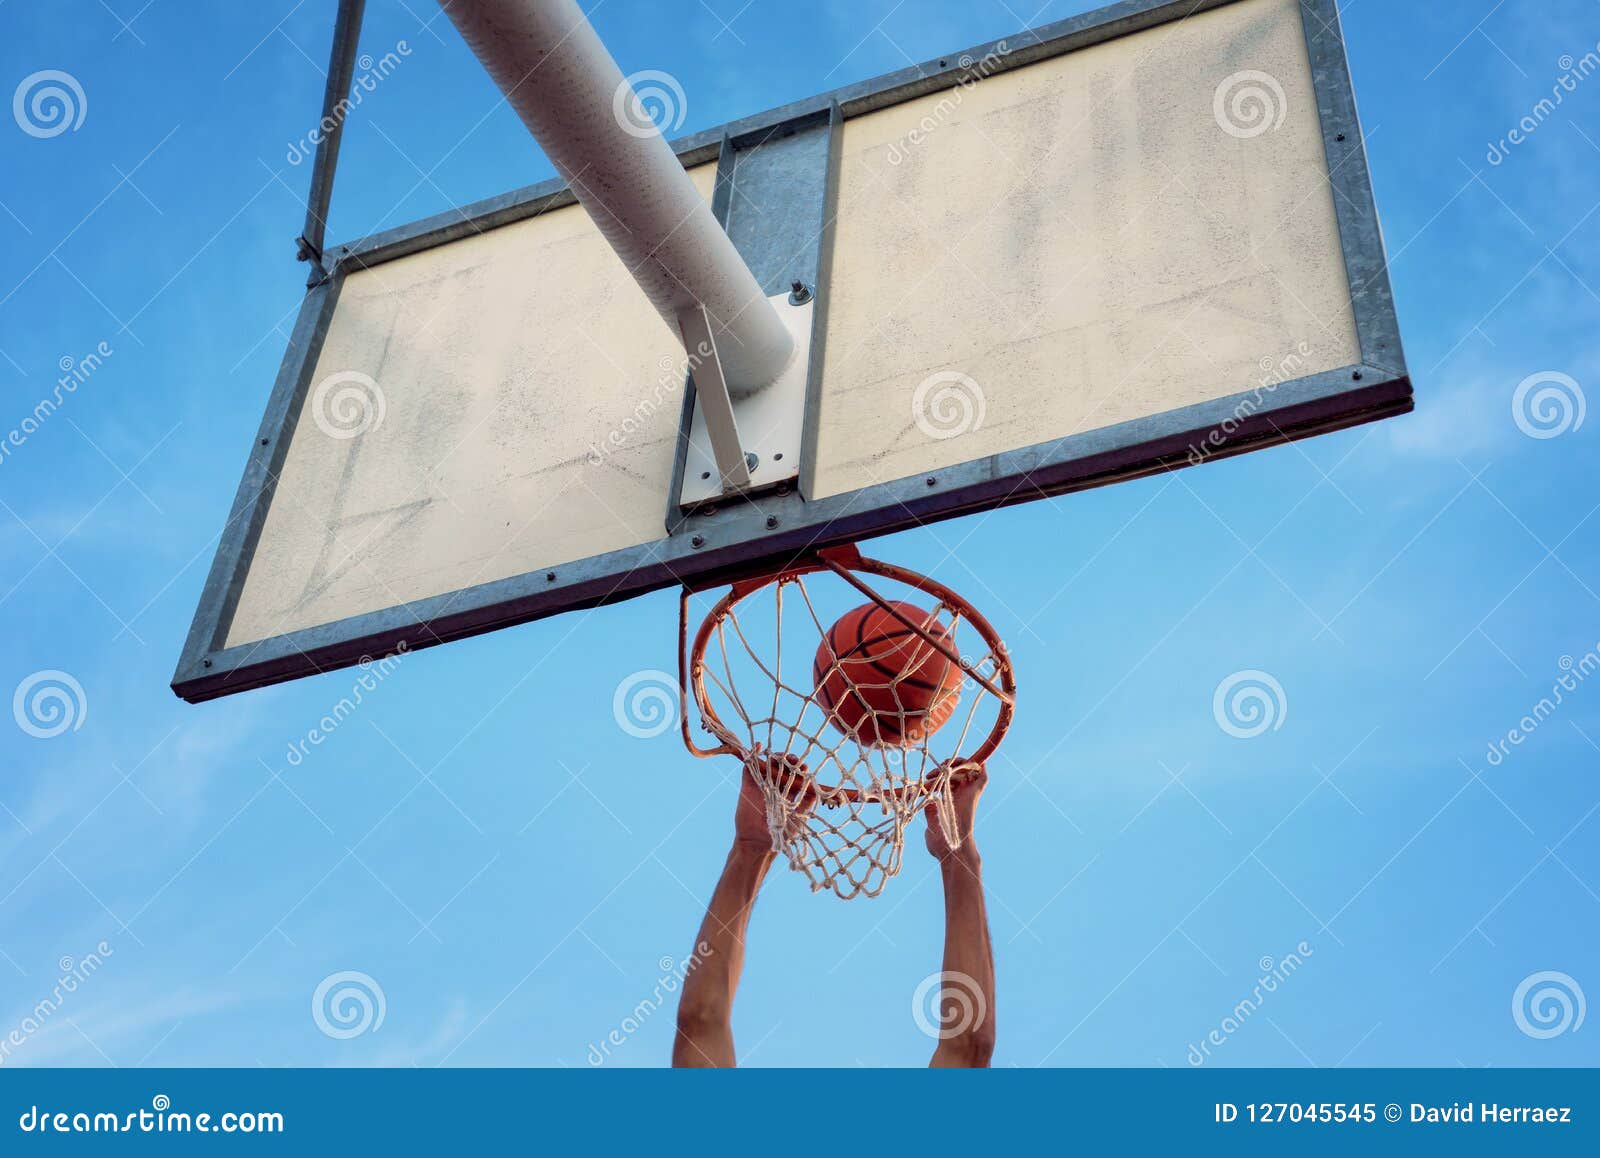 street basketball athlete performing slam dunk on the court